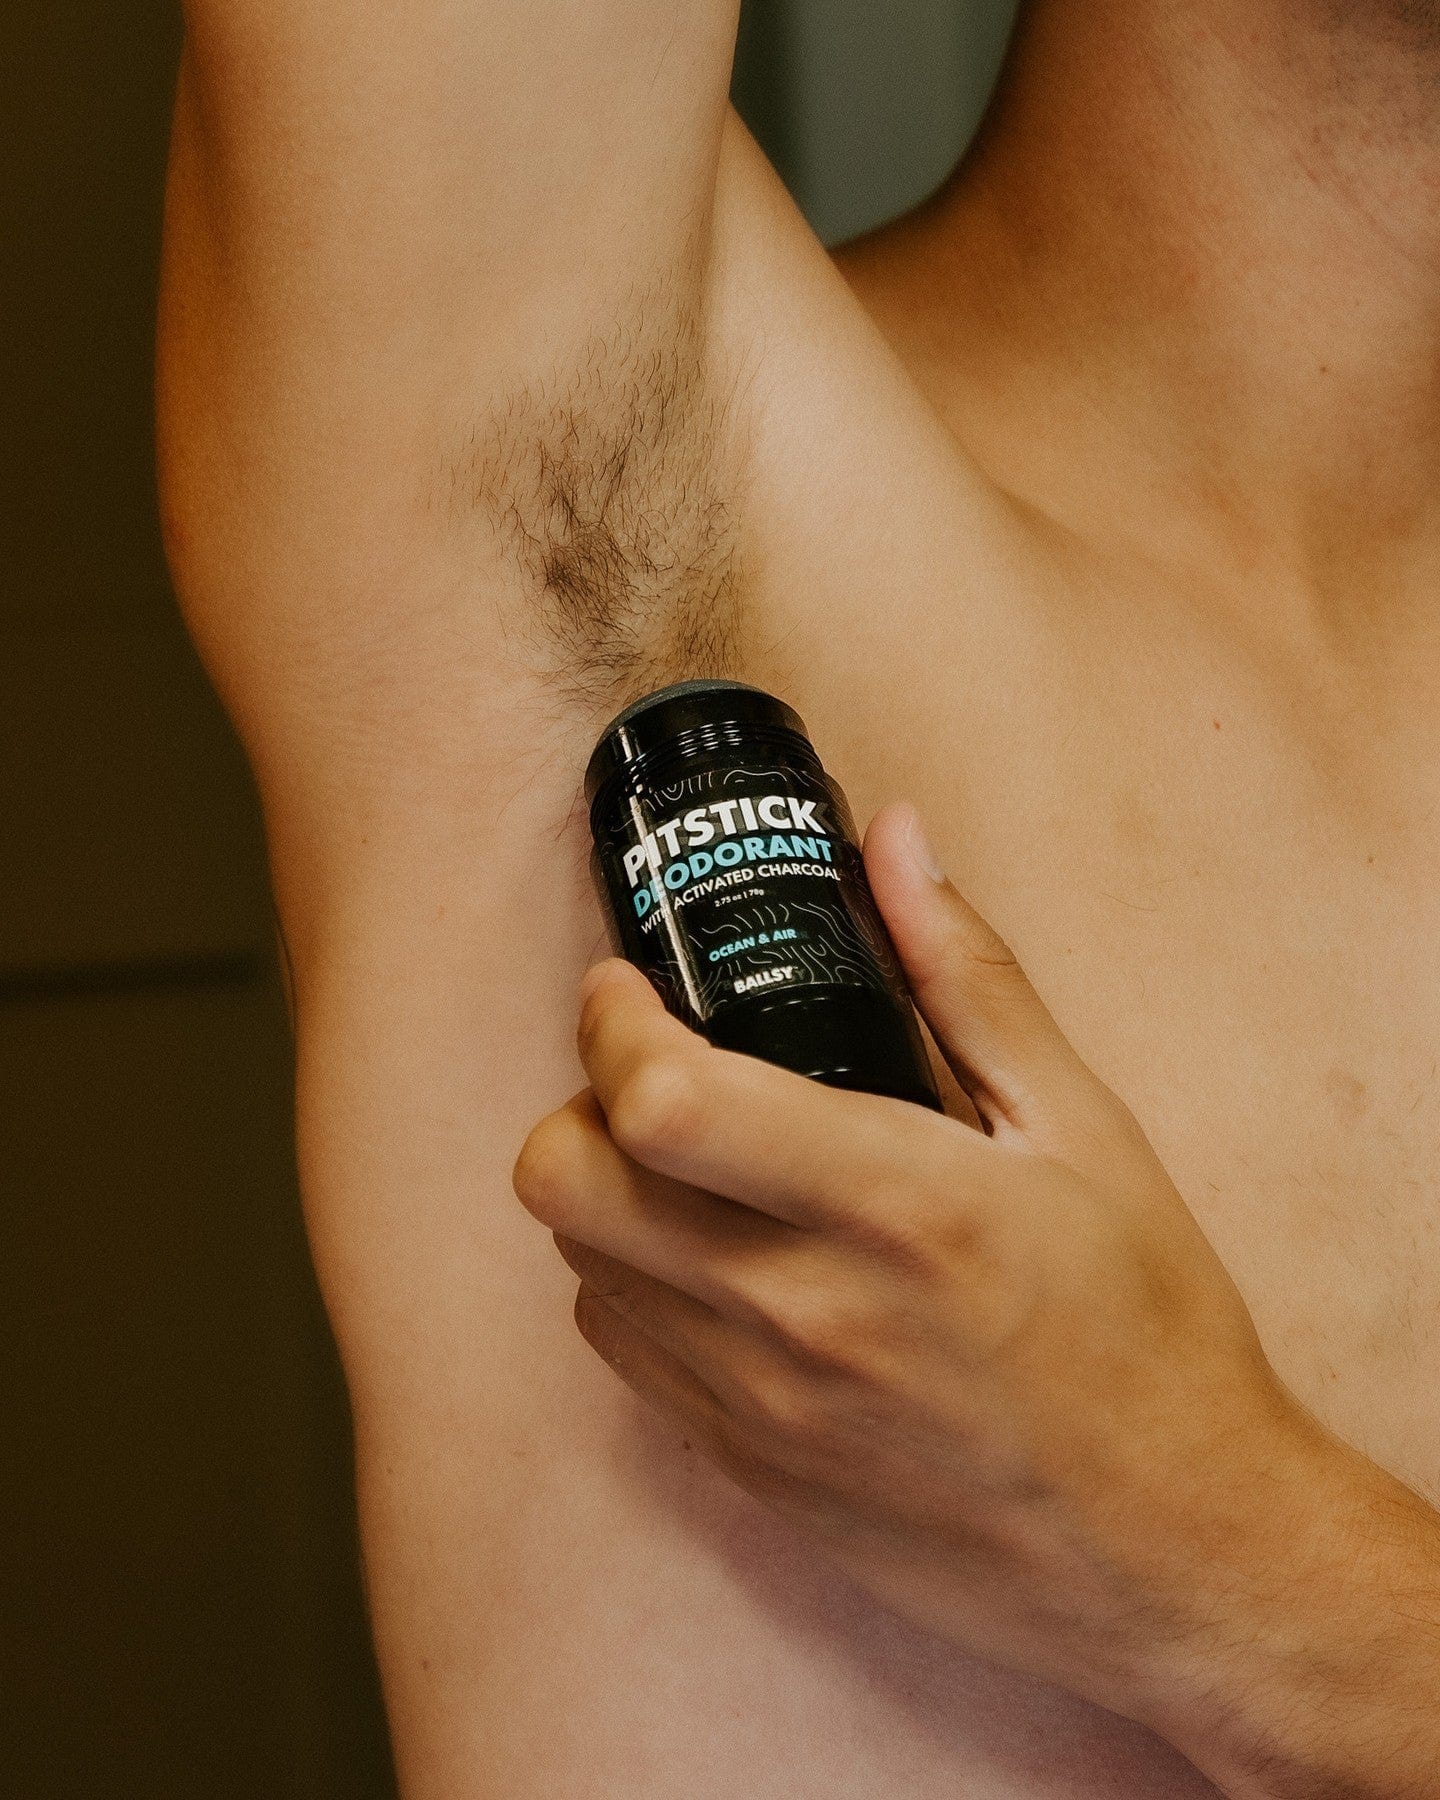 Pitstick Activated Charcoal Natural Deodorant